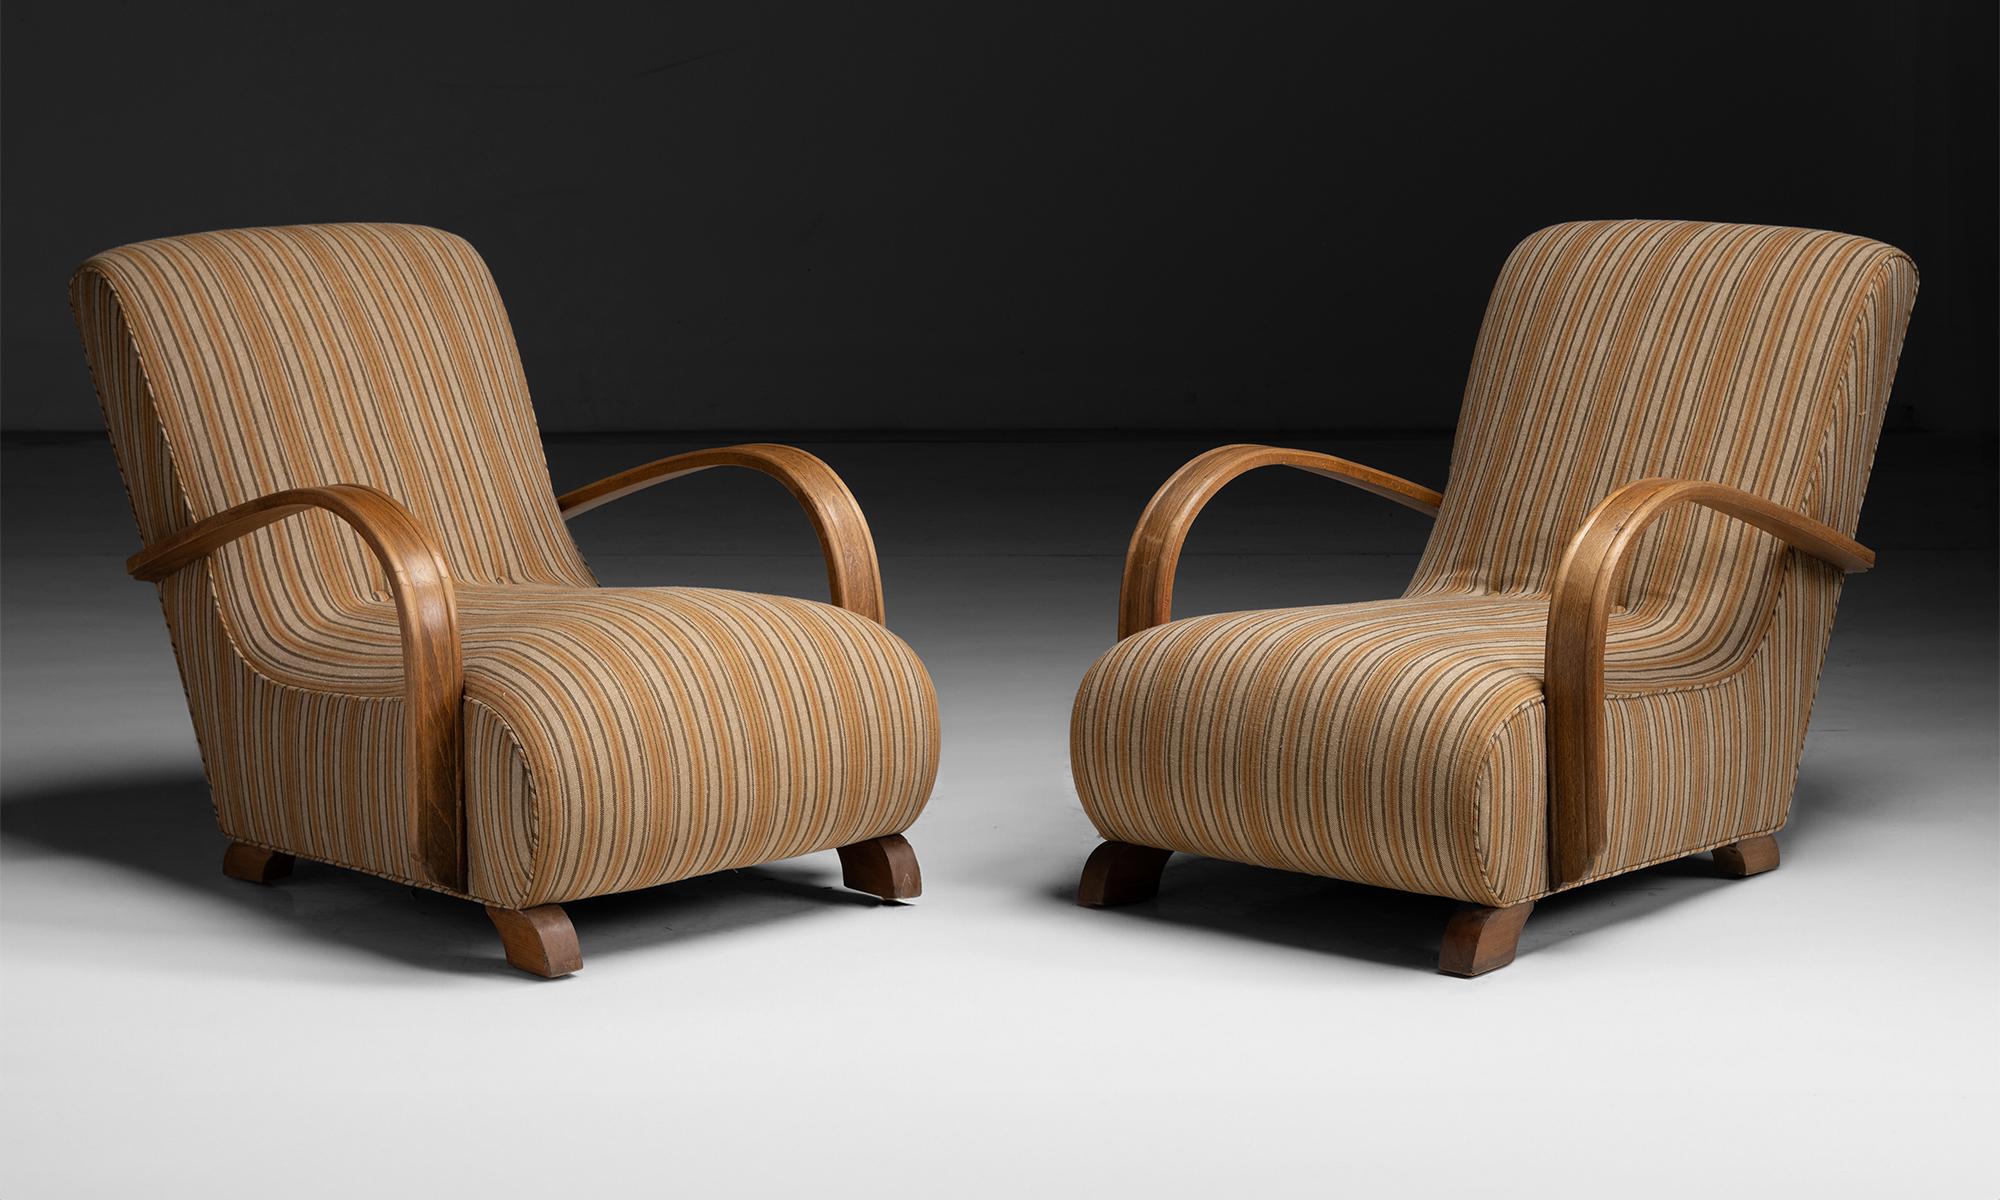 Art Deco Bentwood Armchairs

England circa 1930

Newly upholstered in striped 100% linen by de Le Cuona

27”w x 43”d 30”h x 13”seat